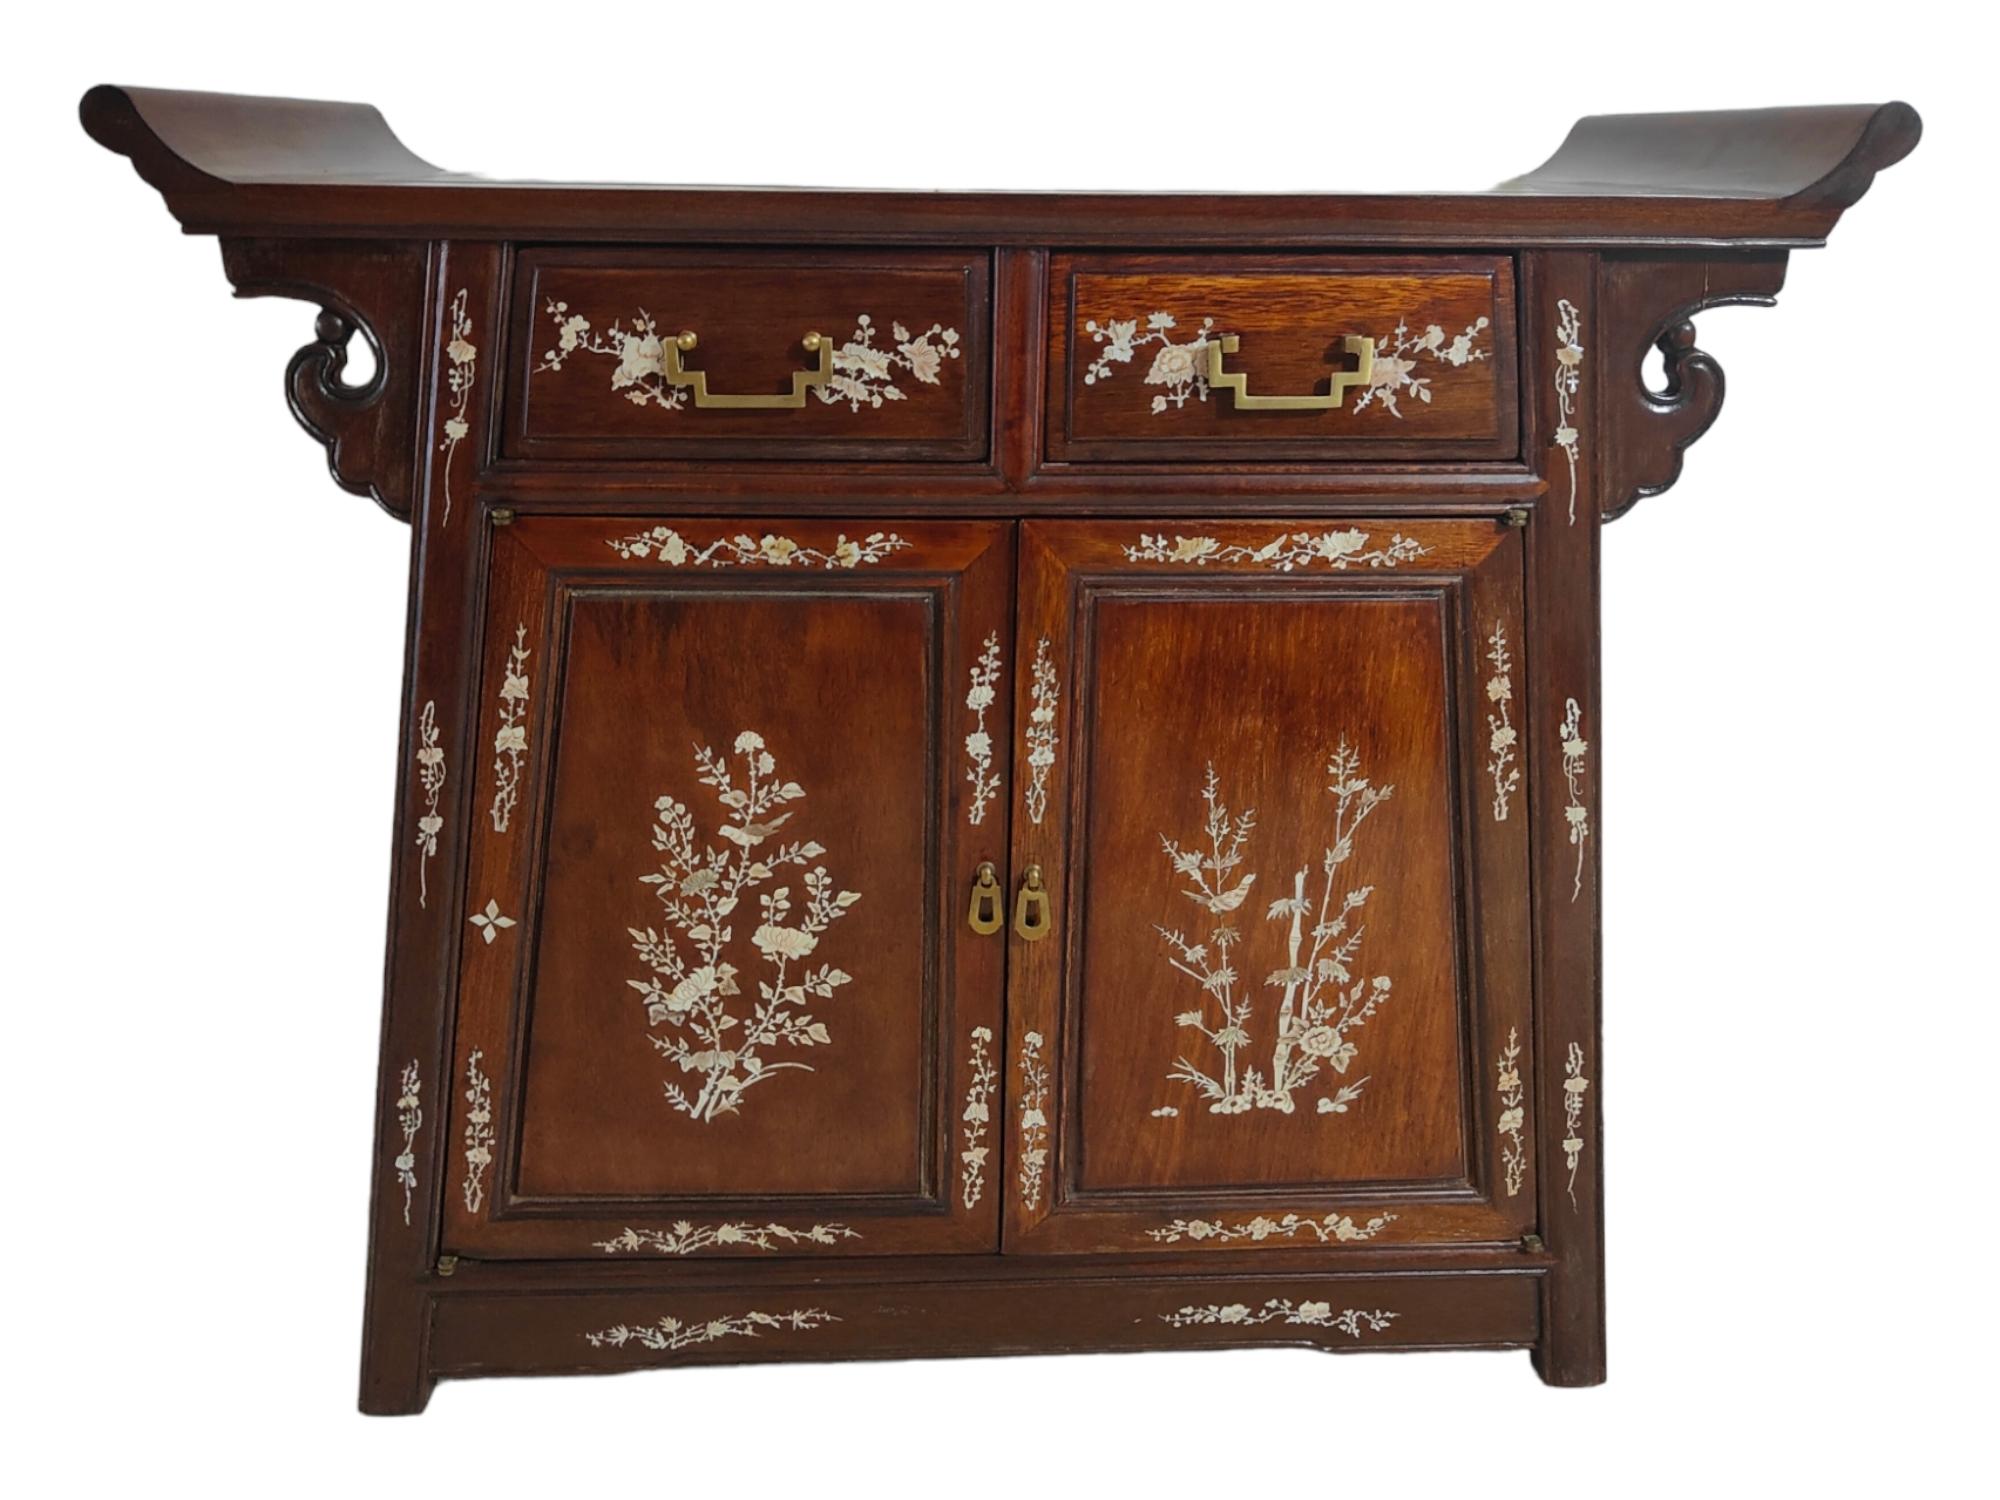 19th Century Chinese Furniture
XIX CENTURY CHINESE FURNITURE BUFFET
ELEGANT CHINESE FURNITURE MADE WITH EXOTIC WOOD AND INLAID MOTHER OF PEARL. VERY GOOD CONDITION. MEASURES: 85X82X40 CM